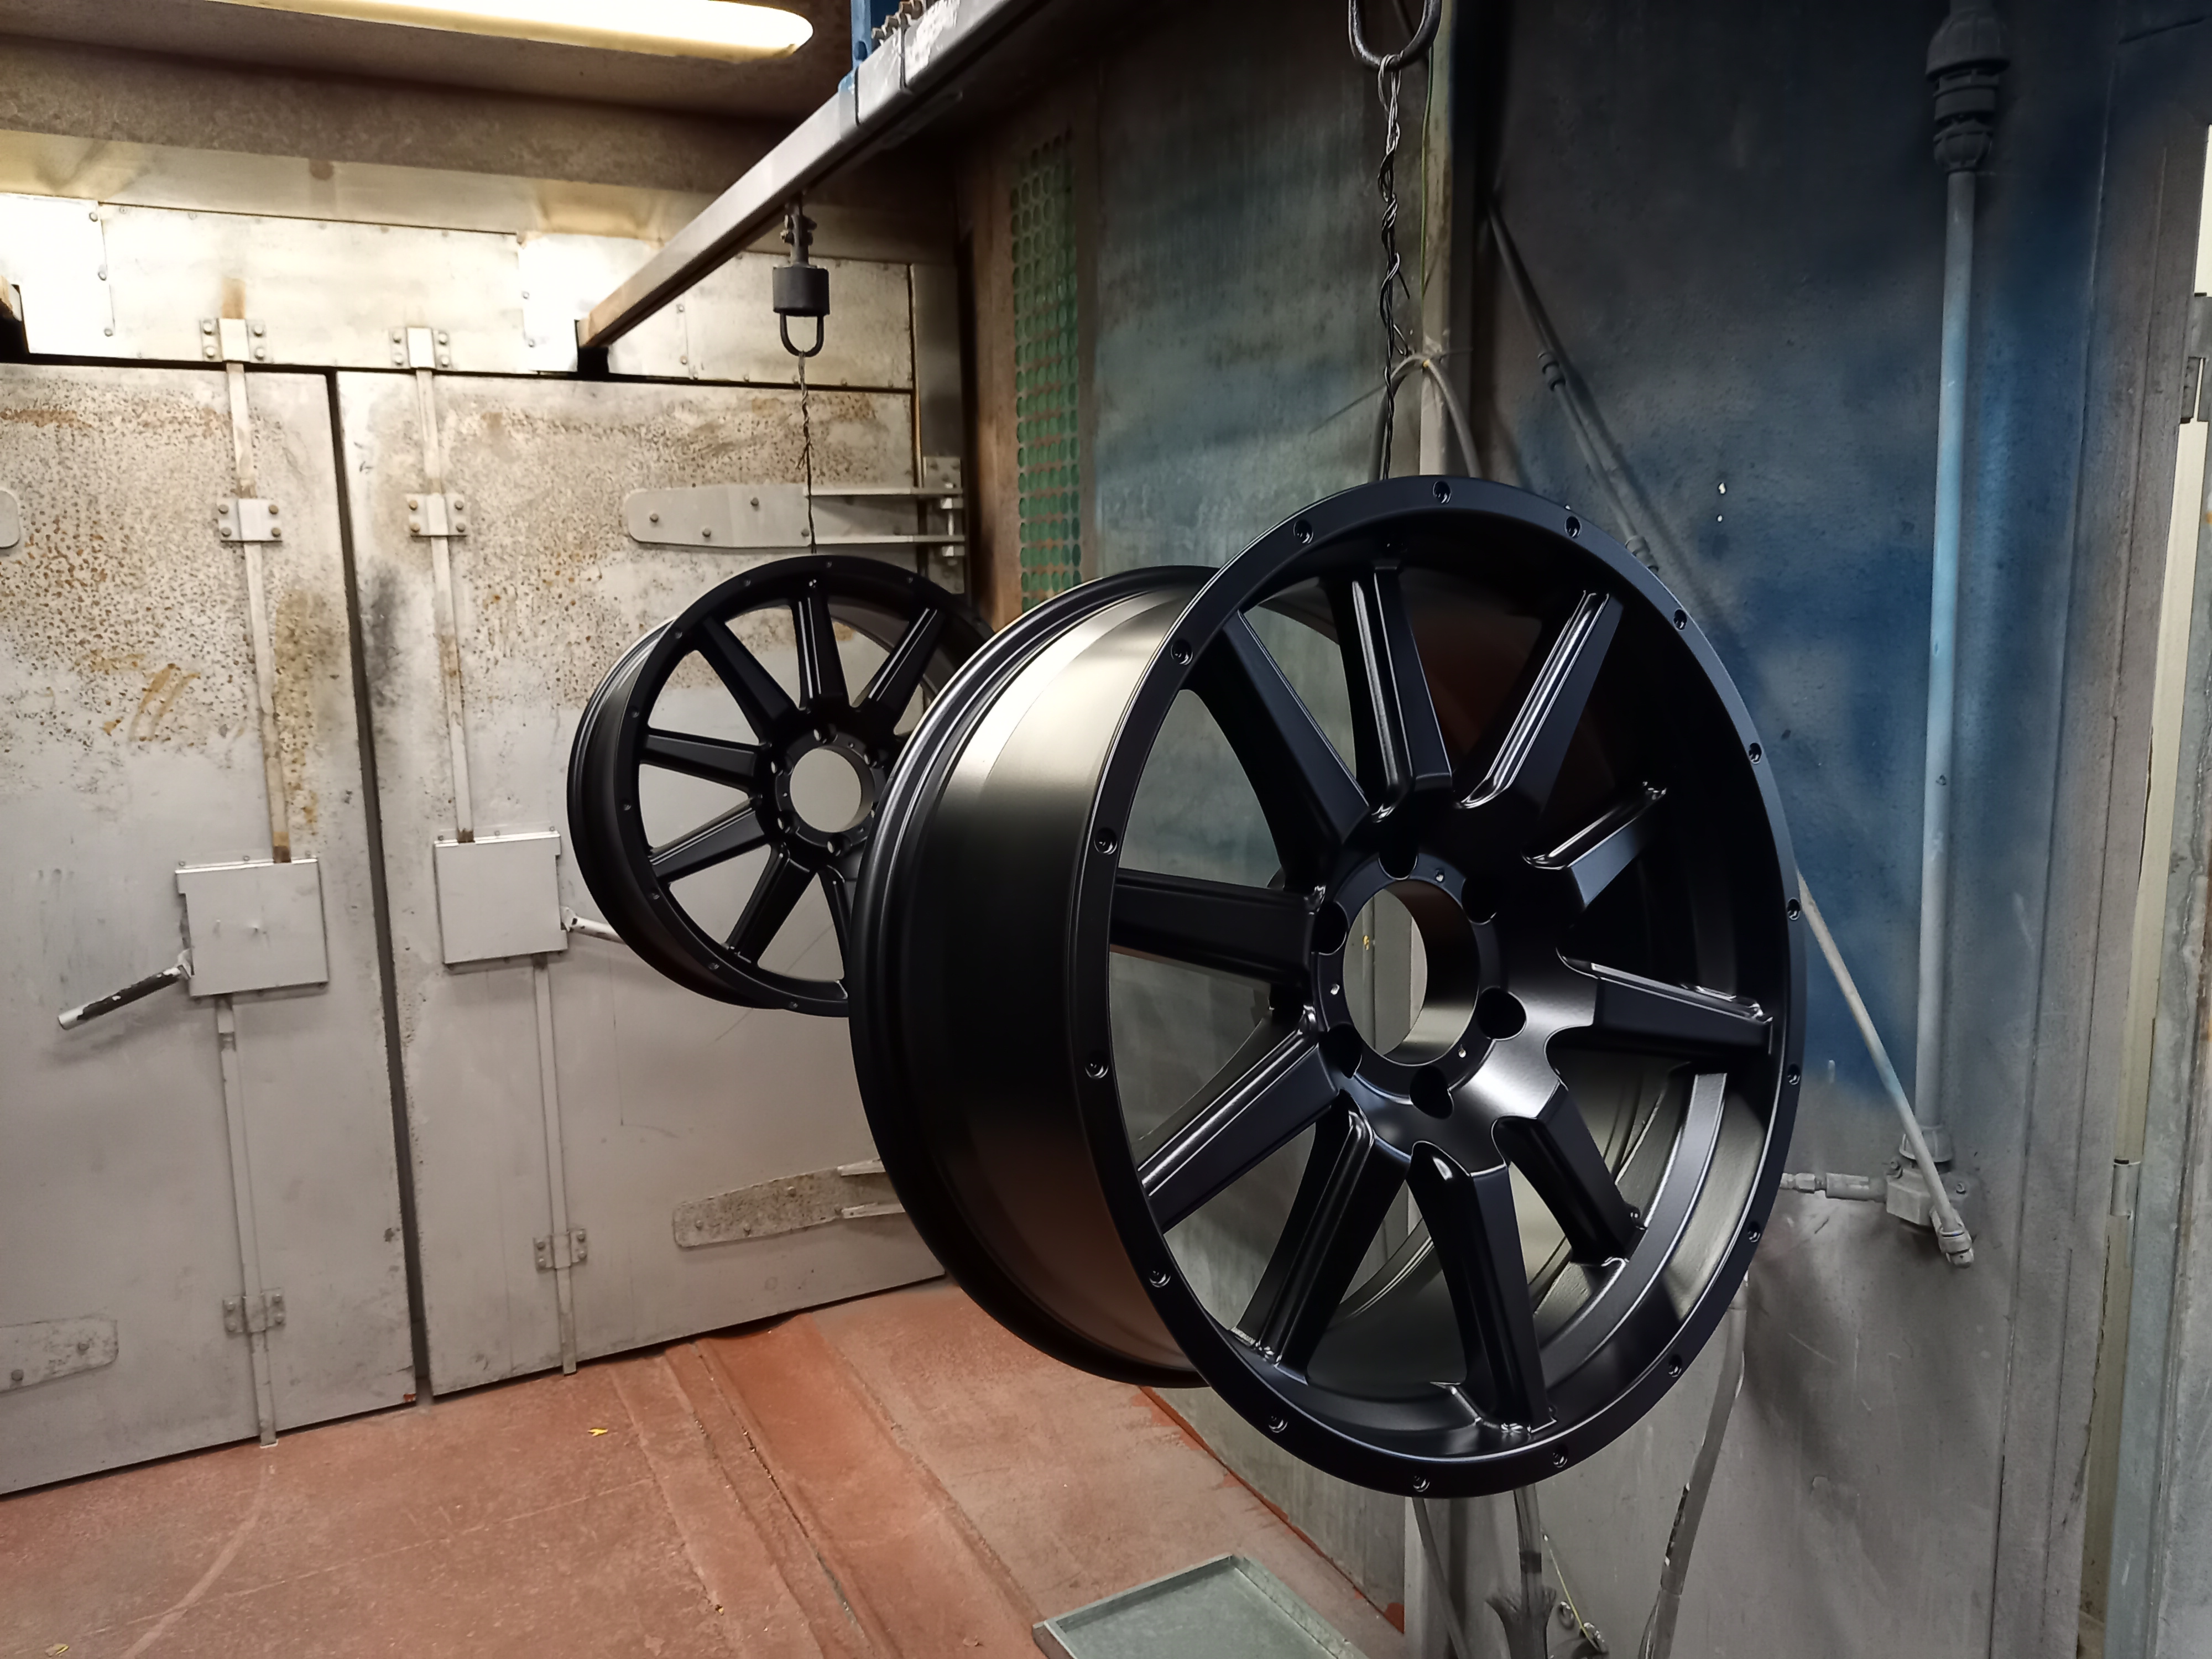 At Mario's Wheel Repairs, we don't just paint the face of the wheel - we also do the powder coating, both the internal and the external part, just like the original factory process.